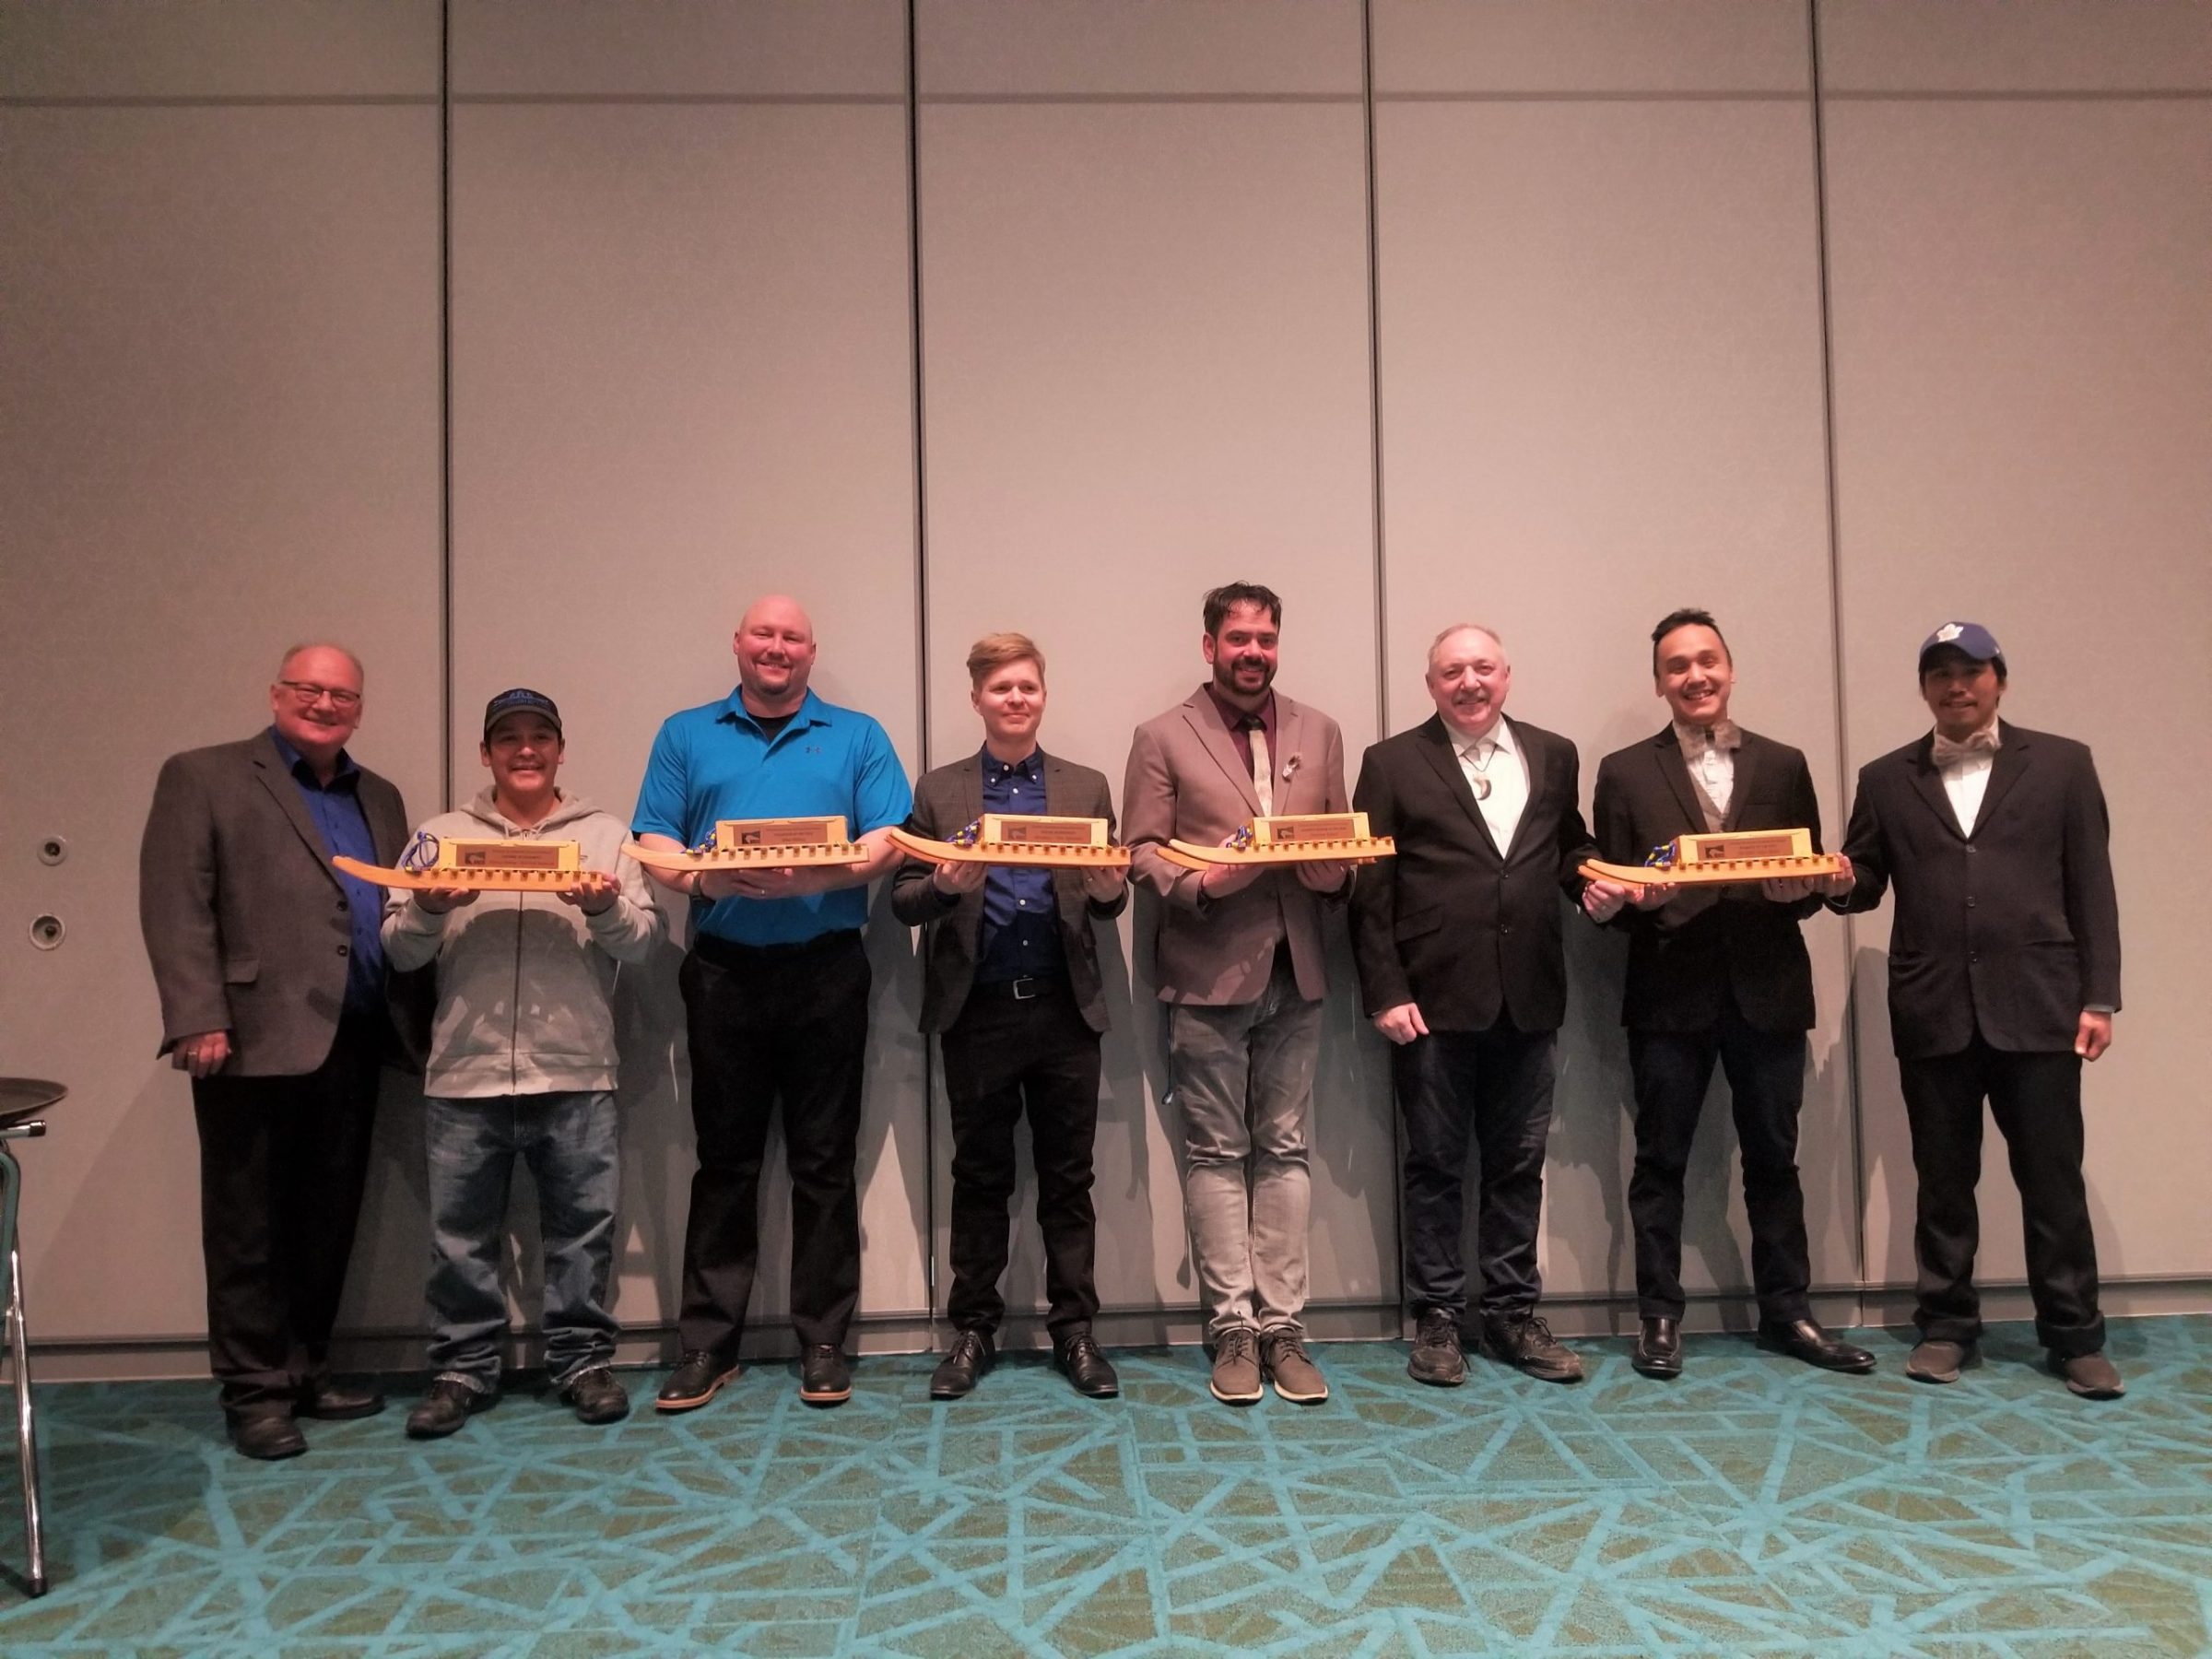 Here are the winners of the 2021 Baffin Regional Chamber of Commerce business awards, seen on Nov. 26. The chamber handed out the awards for its 26th year at Iqaluit’s Aqsarniit hotel. Typically, the awards are handed out at the Nunavut Trade Show, but the trade show was cancelled this year due to COVID-19. From left: Baffin Regional Chamber of Commerce executive director Chris West; Tommy Manning, accepting the lifetime achievement award on behalf of Timmun Alariaq from Huit Huit Tours in Kinngait; volunteer of the year Mike Wilkins from RL Hanson Construction Ltd.; special achievement award winner Thor Simonsen from Hitmakerz; businessperson of the year Clarence Synard from NCC Investment Group Inc.; business of the year award winner Allan Mullin from Al’s BnB and his two employees, Lester Taqqaugaq and Samuel Illupalik. (Photo courtesy of Chris West)